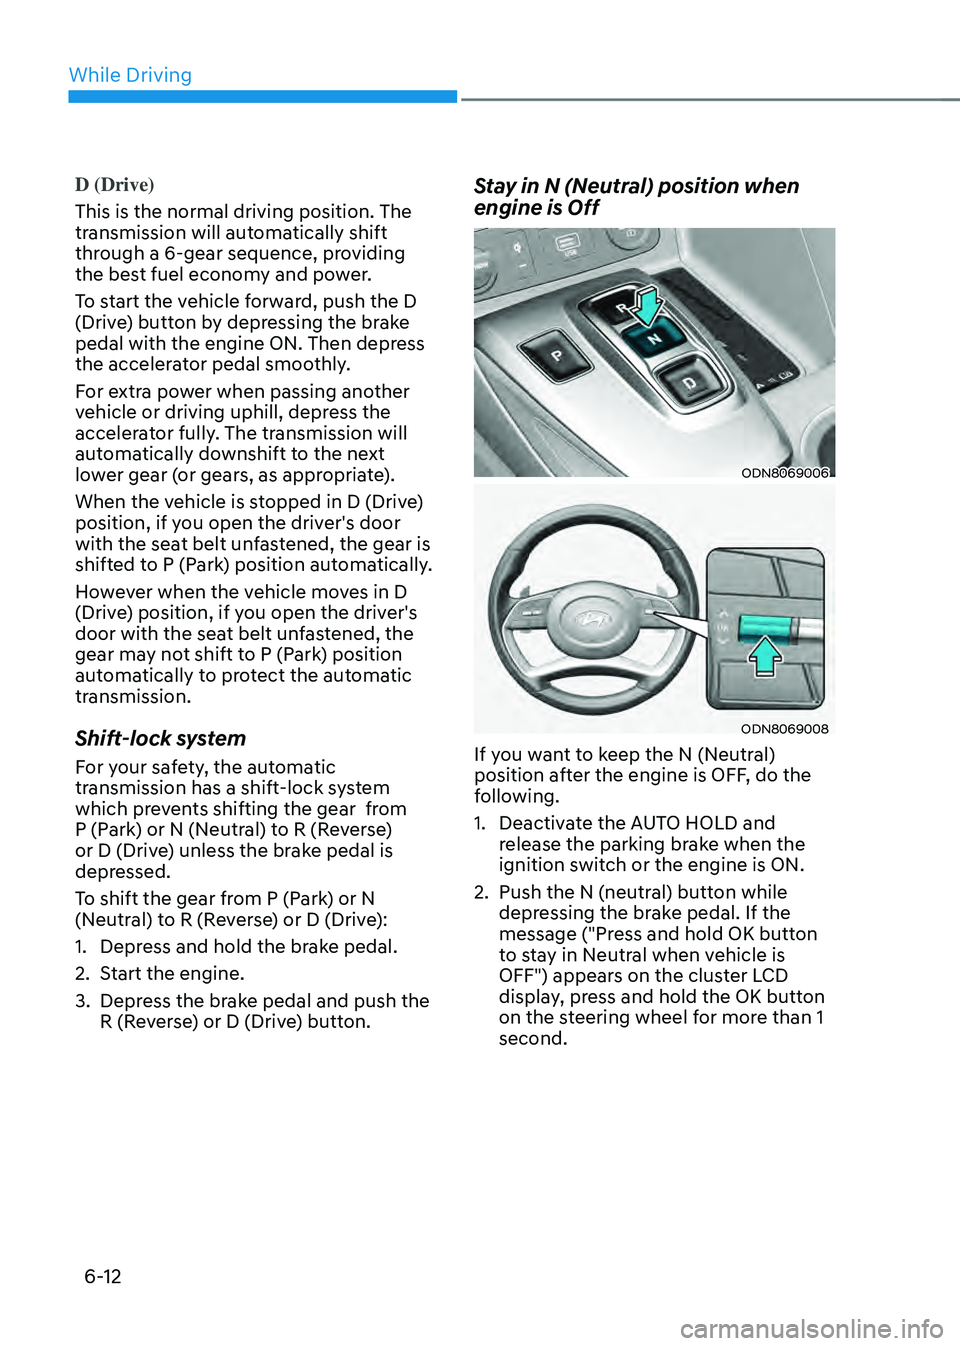 HYUNDAI SONATA HYBRID 2022  Owners Manual While Driving
6-12
D (Drive) 
This is the normal driving position. The 
transmission will automatically shift 
through a 6-gear sequence, providing 
the best fuel economy and power.
To start the vehic